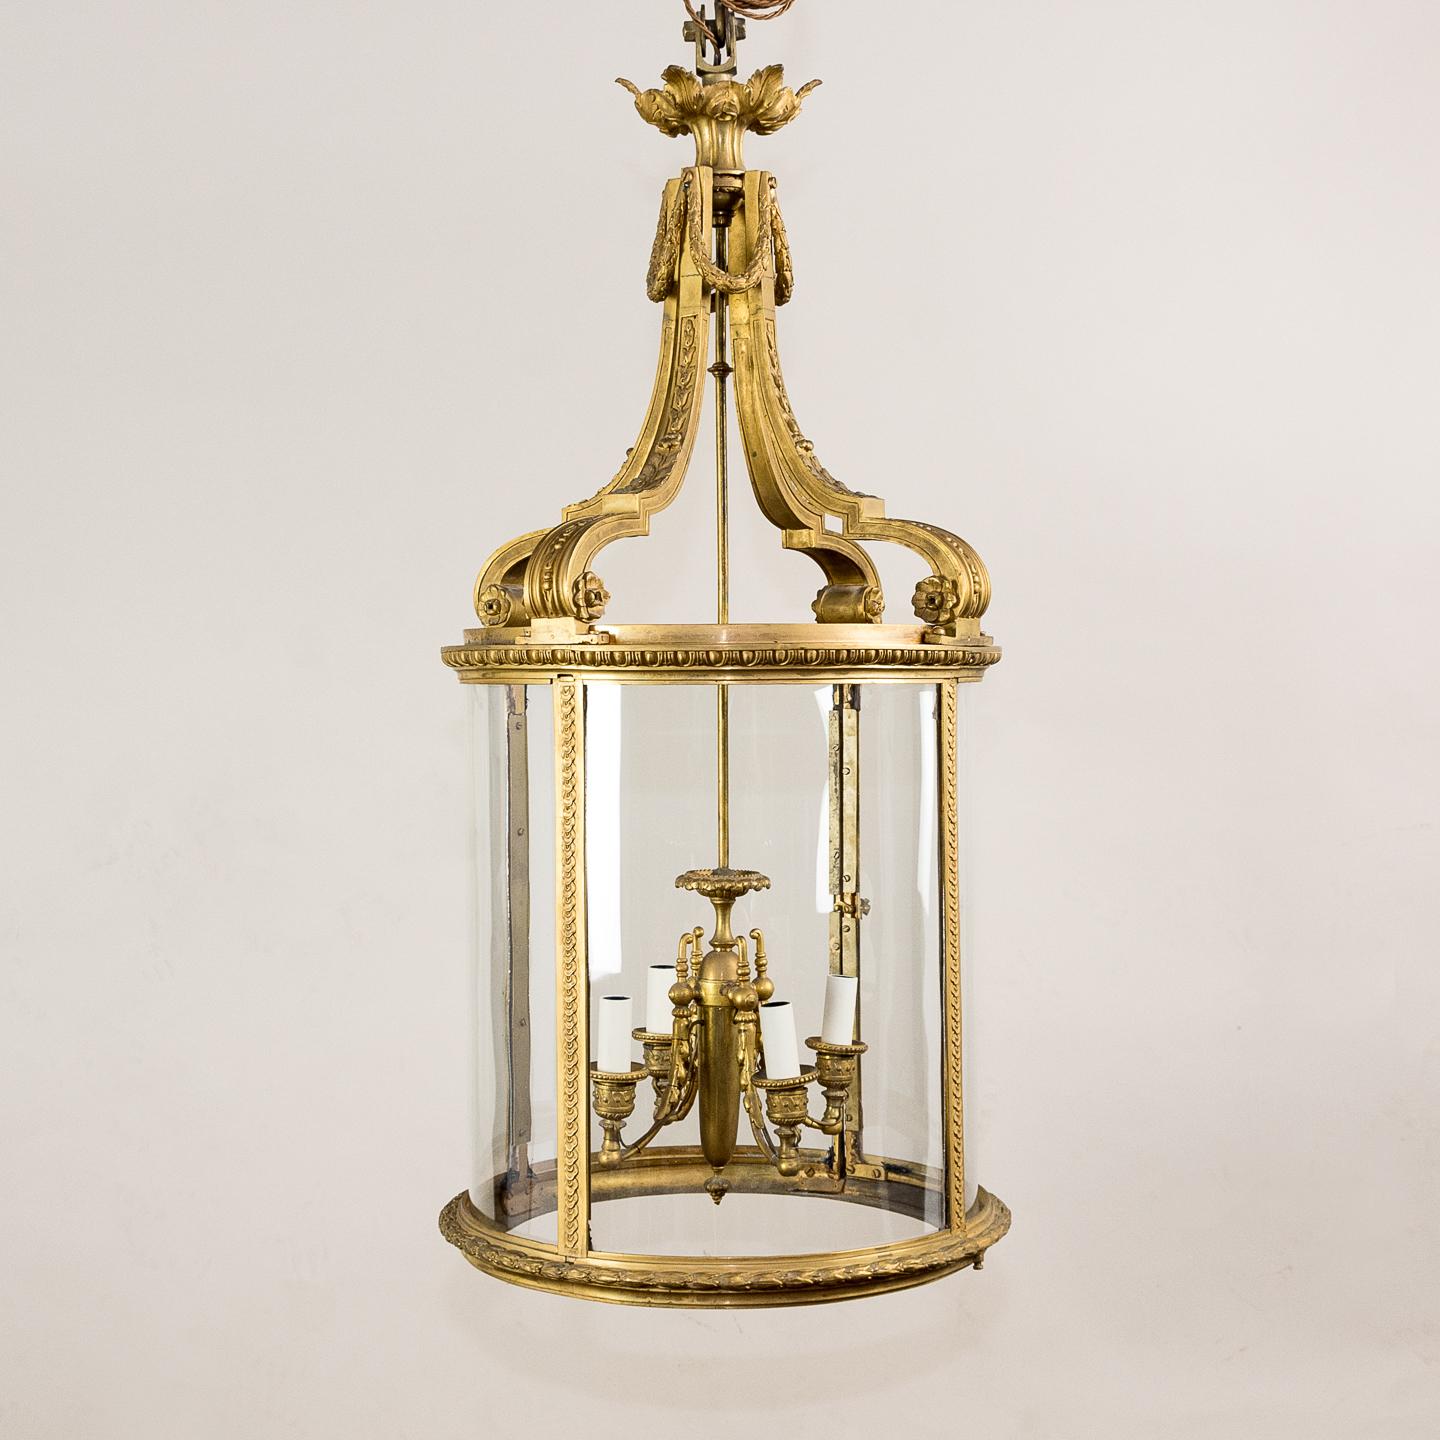 A Louis XVI style gilt bronze cylindrical hall lantern, the substantial cast bracket supports with laurel wreaths to the top and rosettes to the base, the body with egg and dart frieze above uprights with decorative imbricated motif, the base with